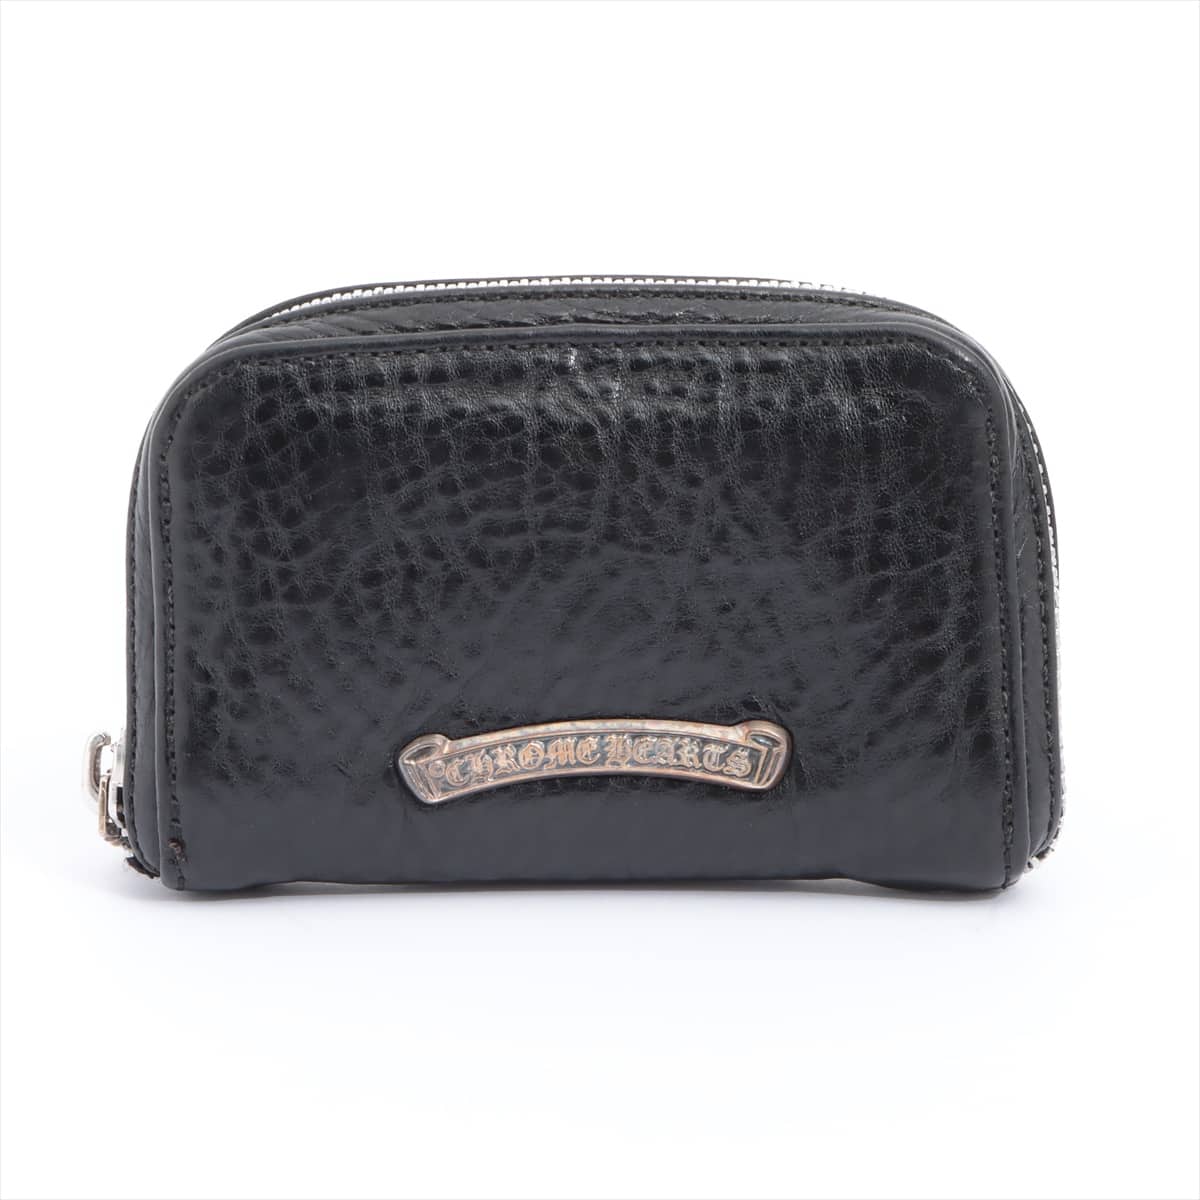 Chrome Hearts Coin case Leather